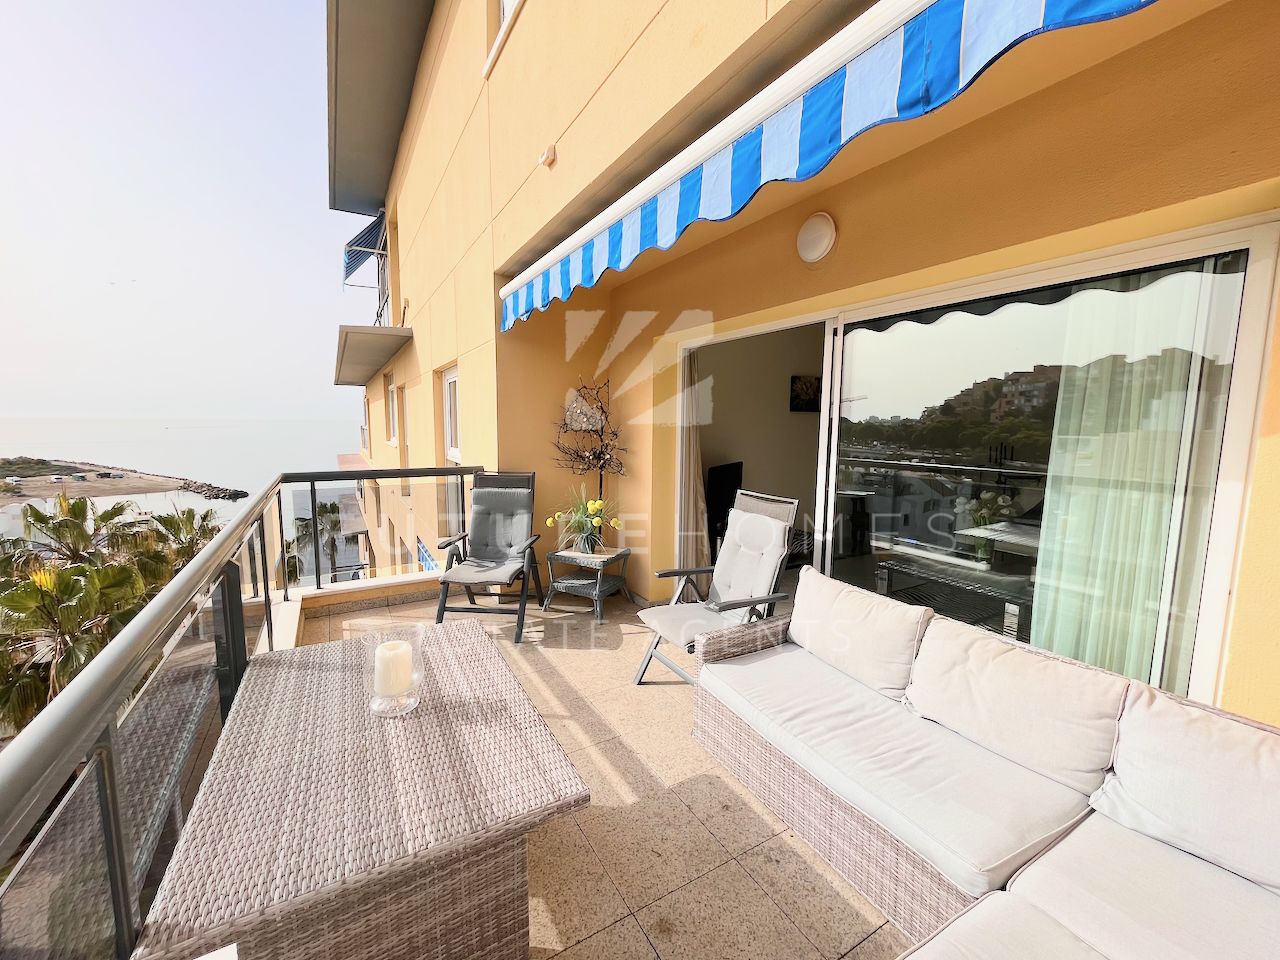 Immaculate spacious apartment on highly sought after beachside community